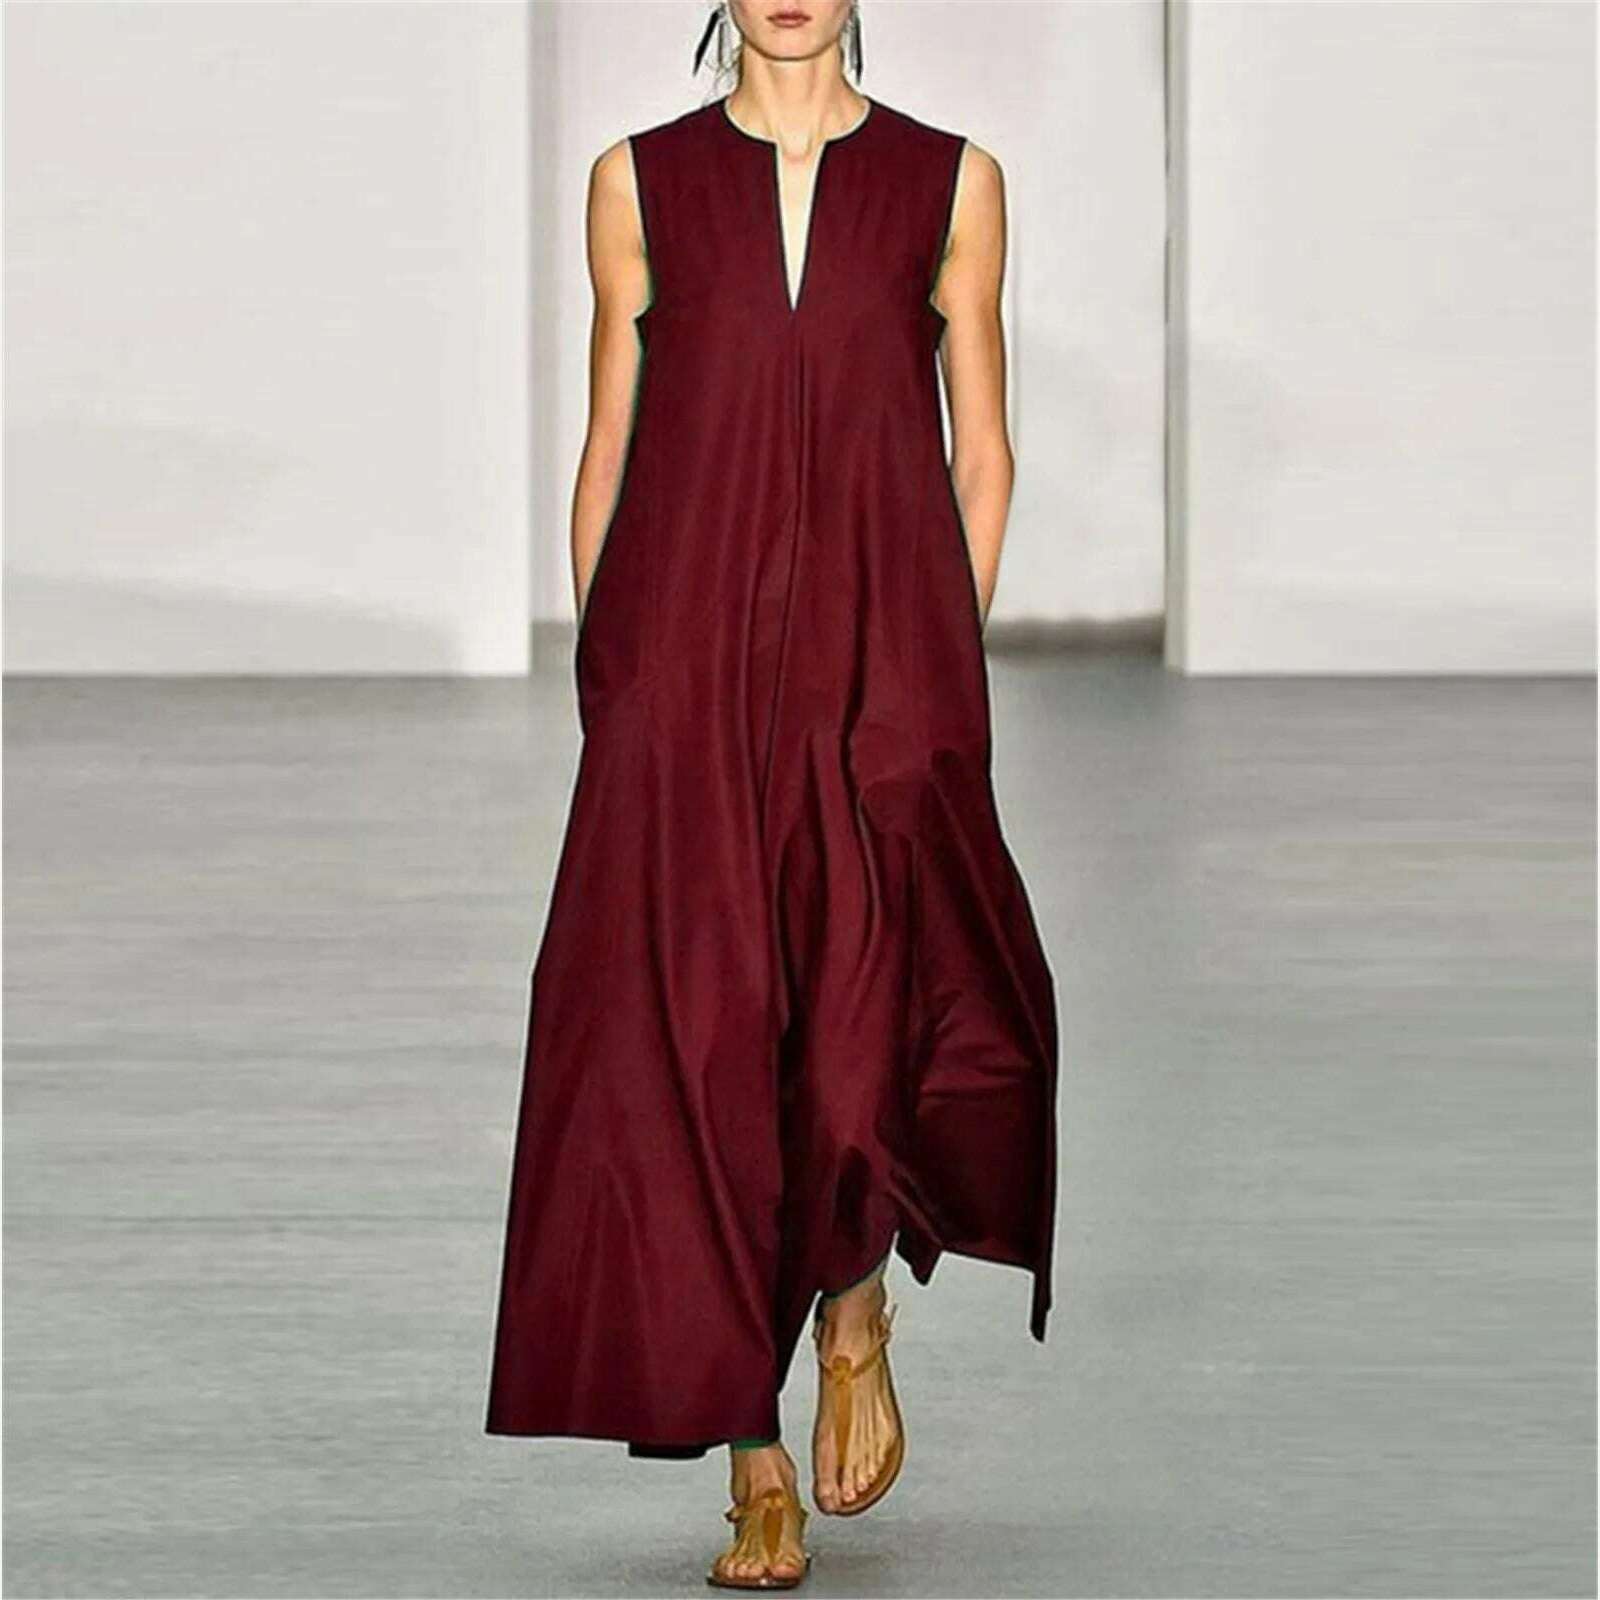 KIMLUD, Plus Size 2023 New Arrival Women Summer Dresses Vintage Daily Casual Sleeveless Long Dresses Cotton Blend Summer Dress Vestidos, Wine / S / CHINA, KIMLUD Women's Clothes